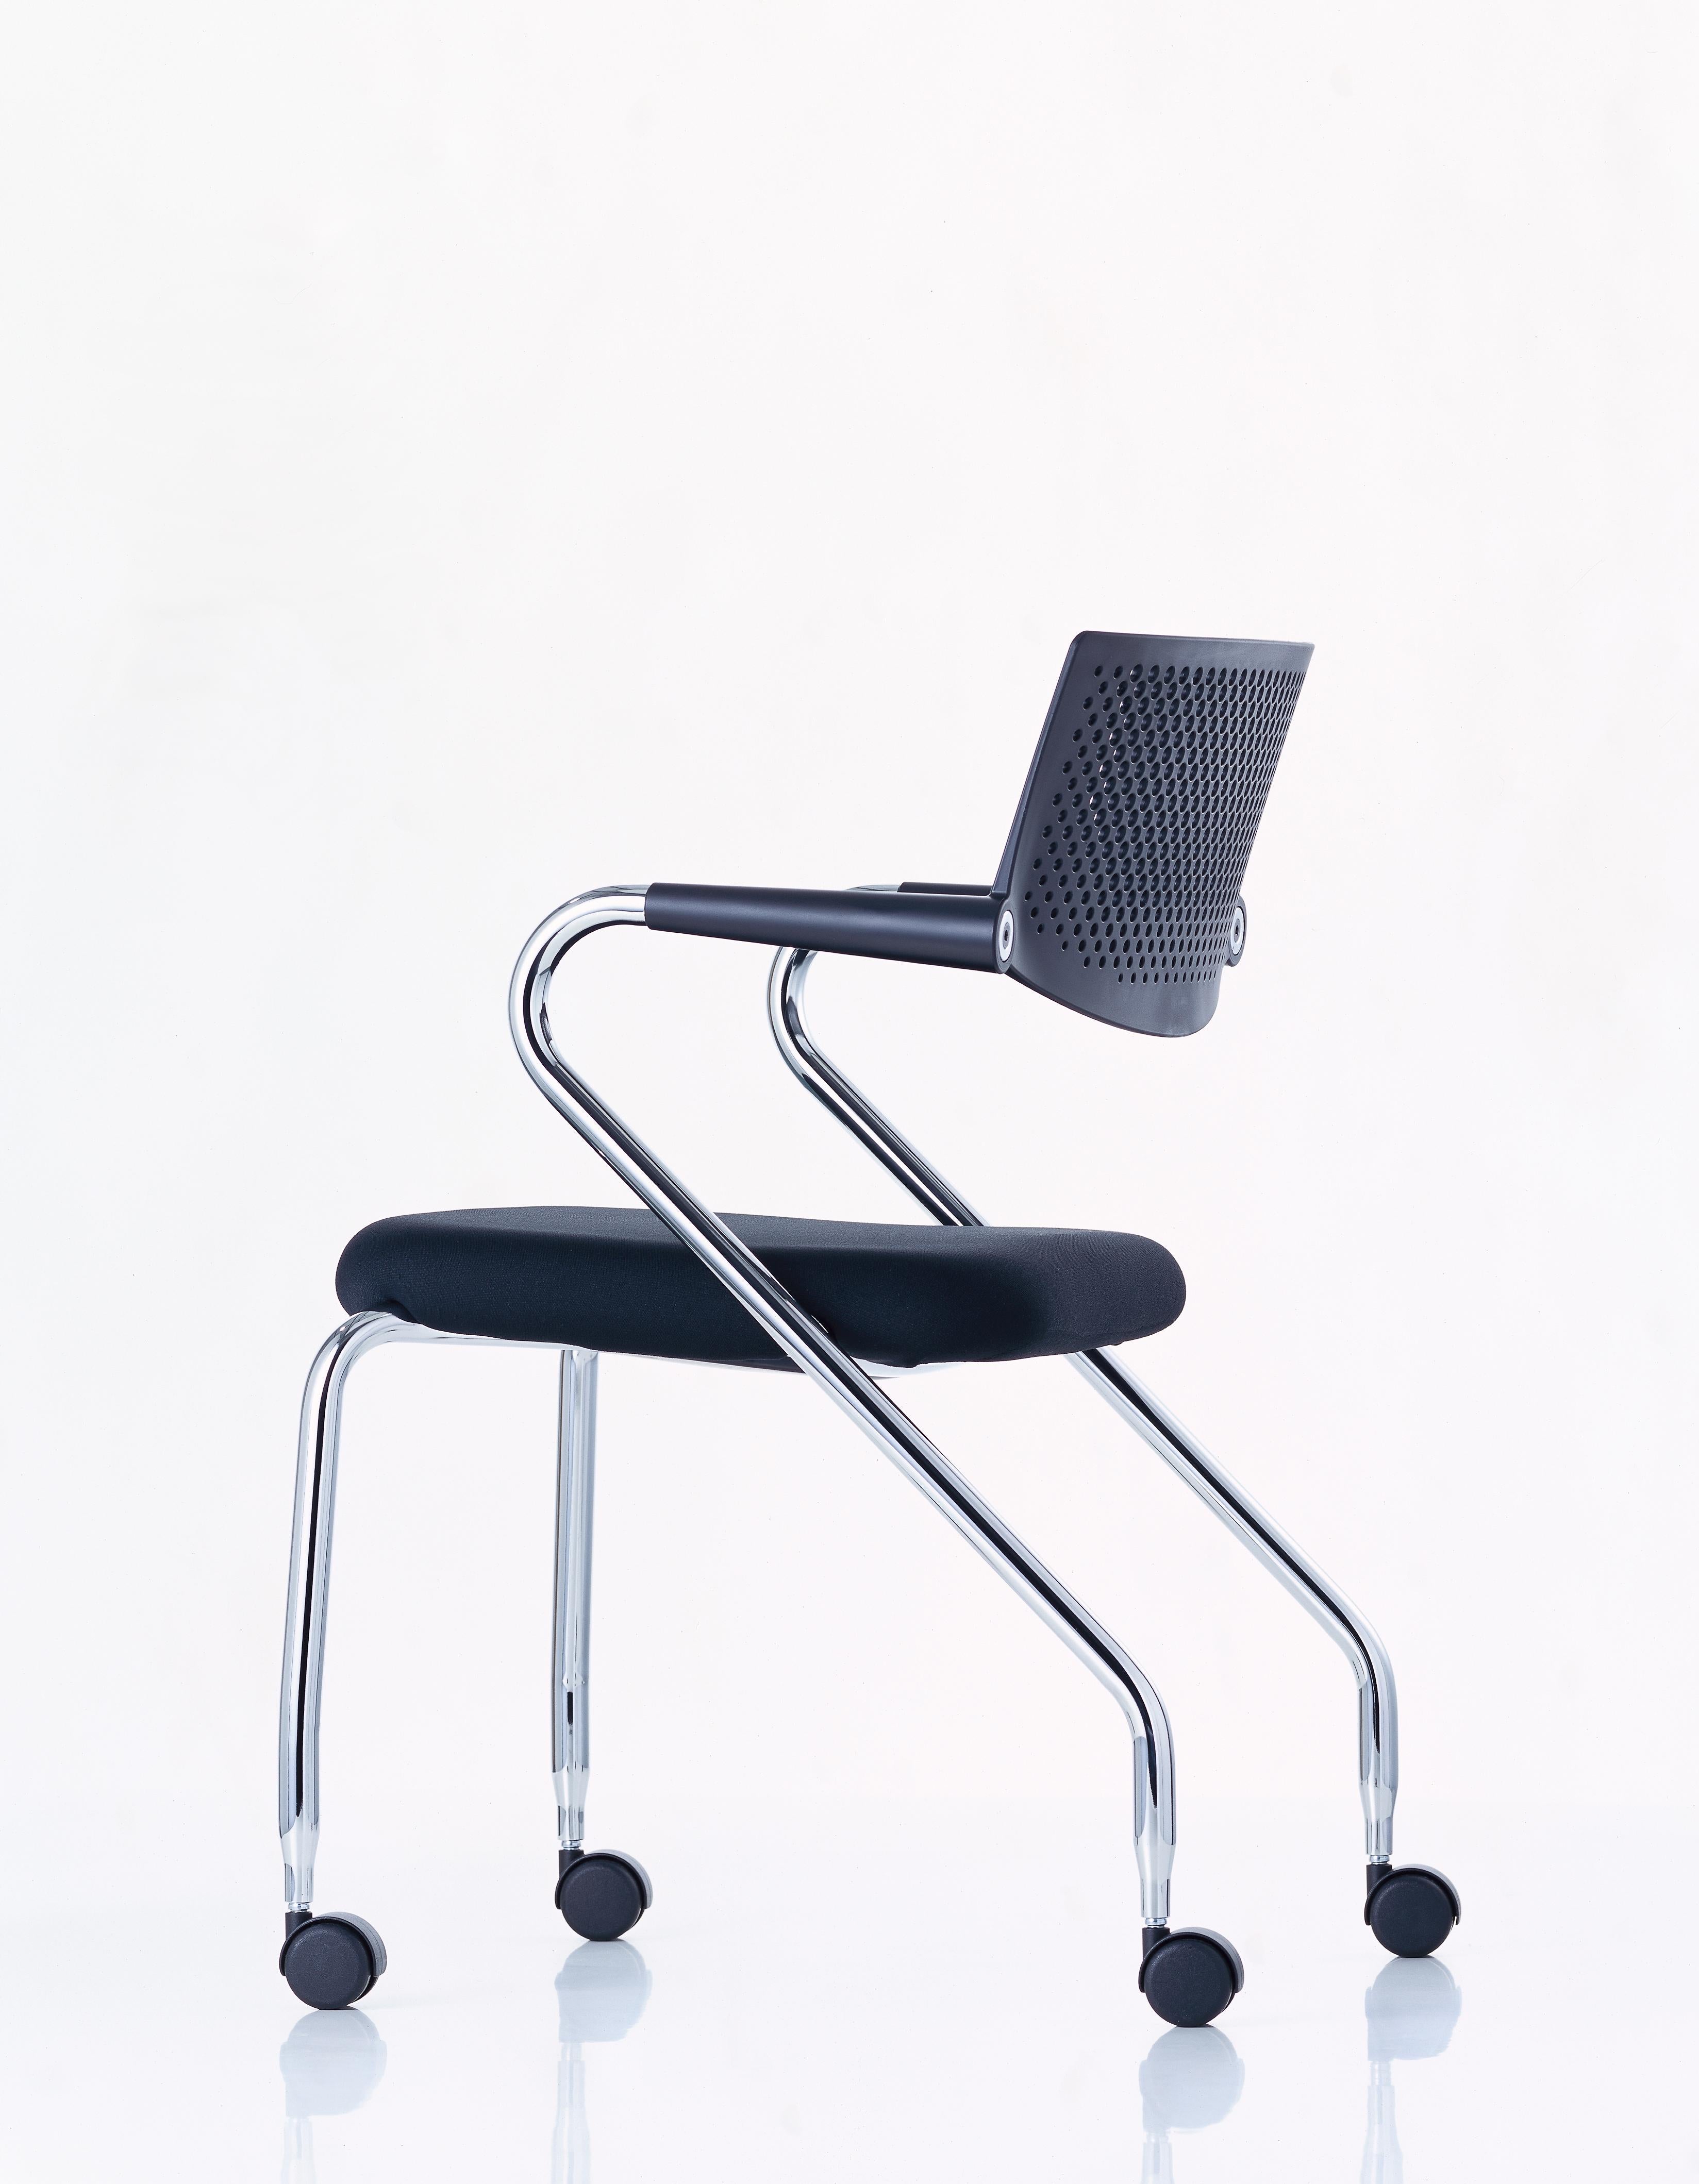 These items are currently only available in the United States.

Visaroll 2 is a highly versatile and comfortable four-legged chair on castors. It is distinguished by it's mobility and universal suitability not only as a task and visitor chair but